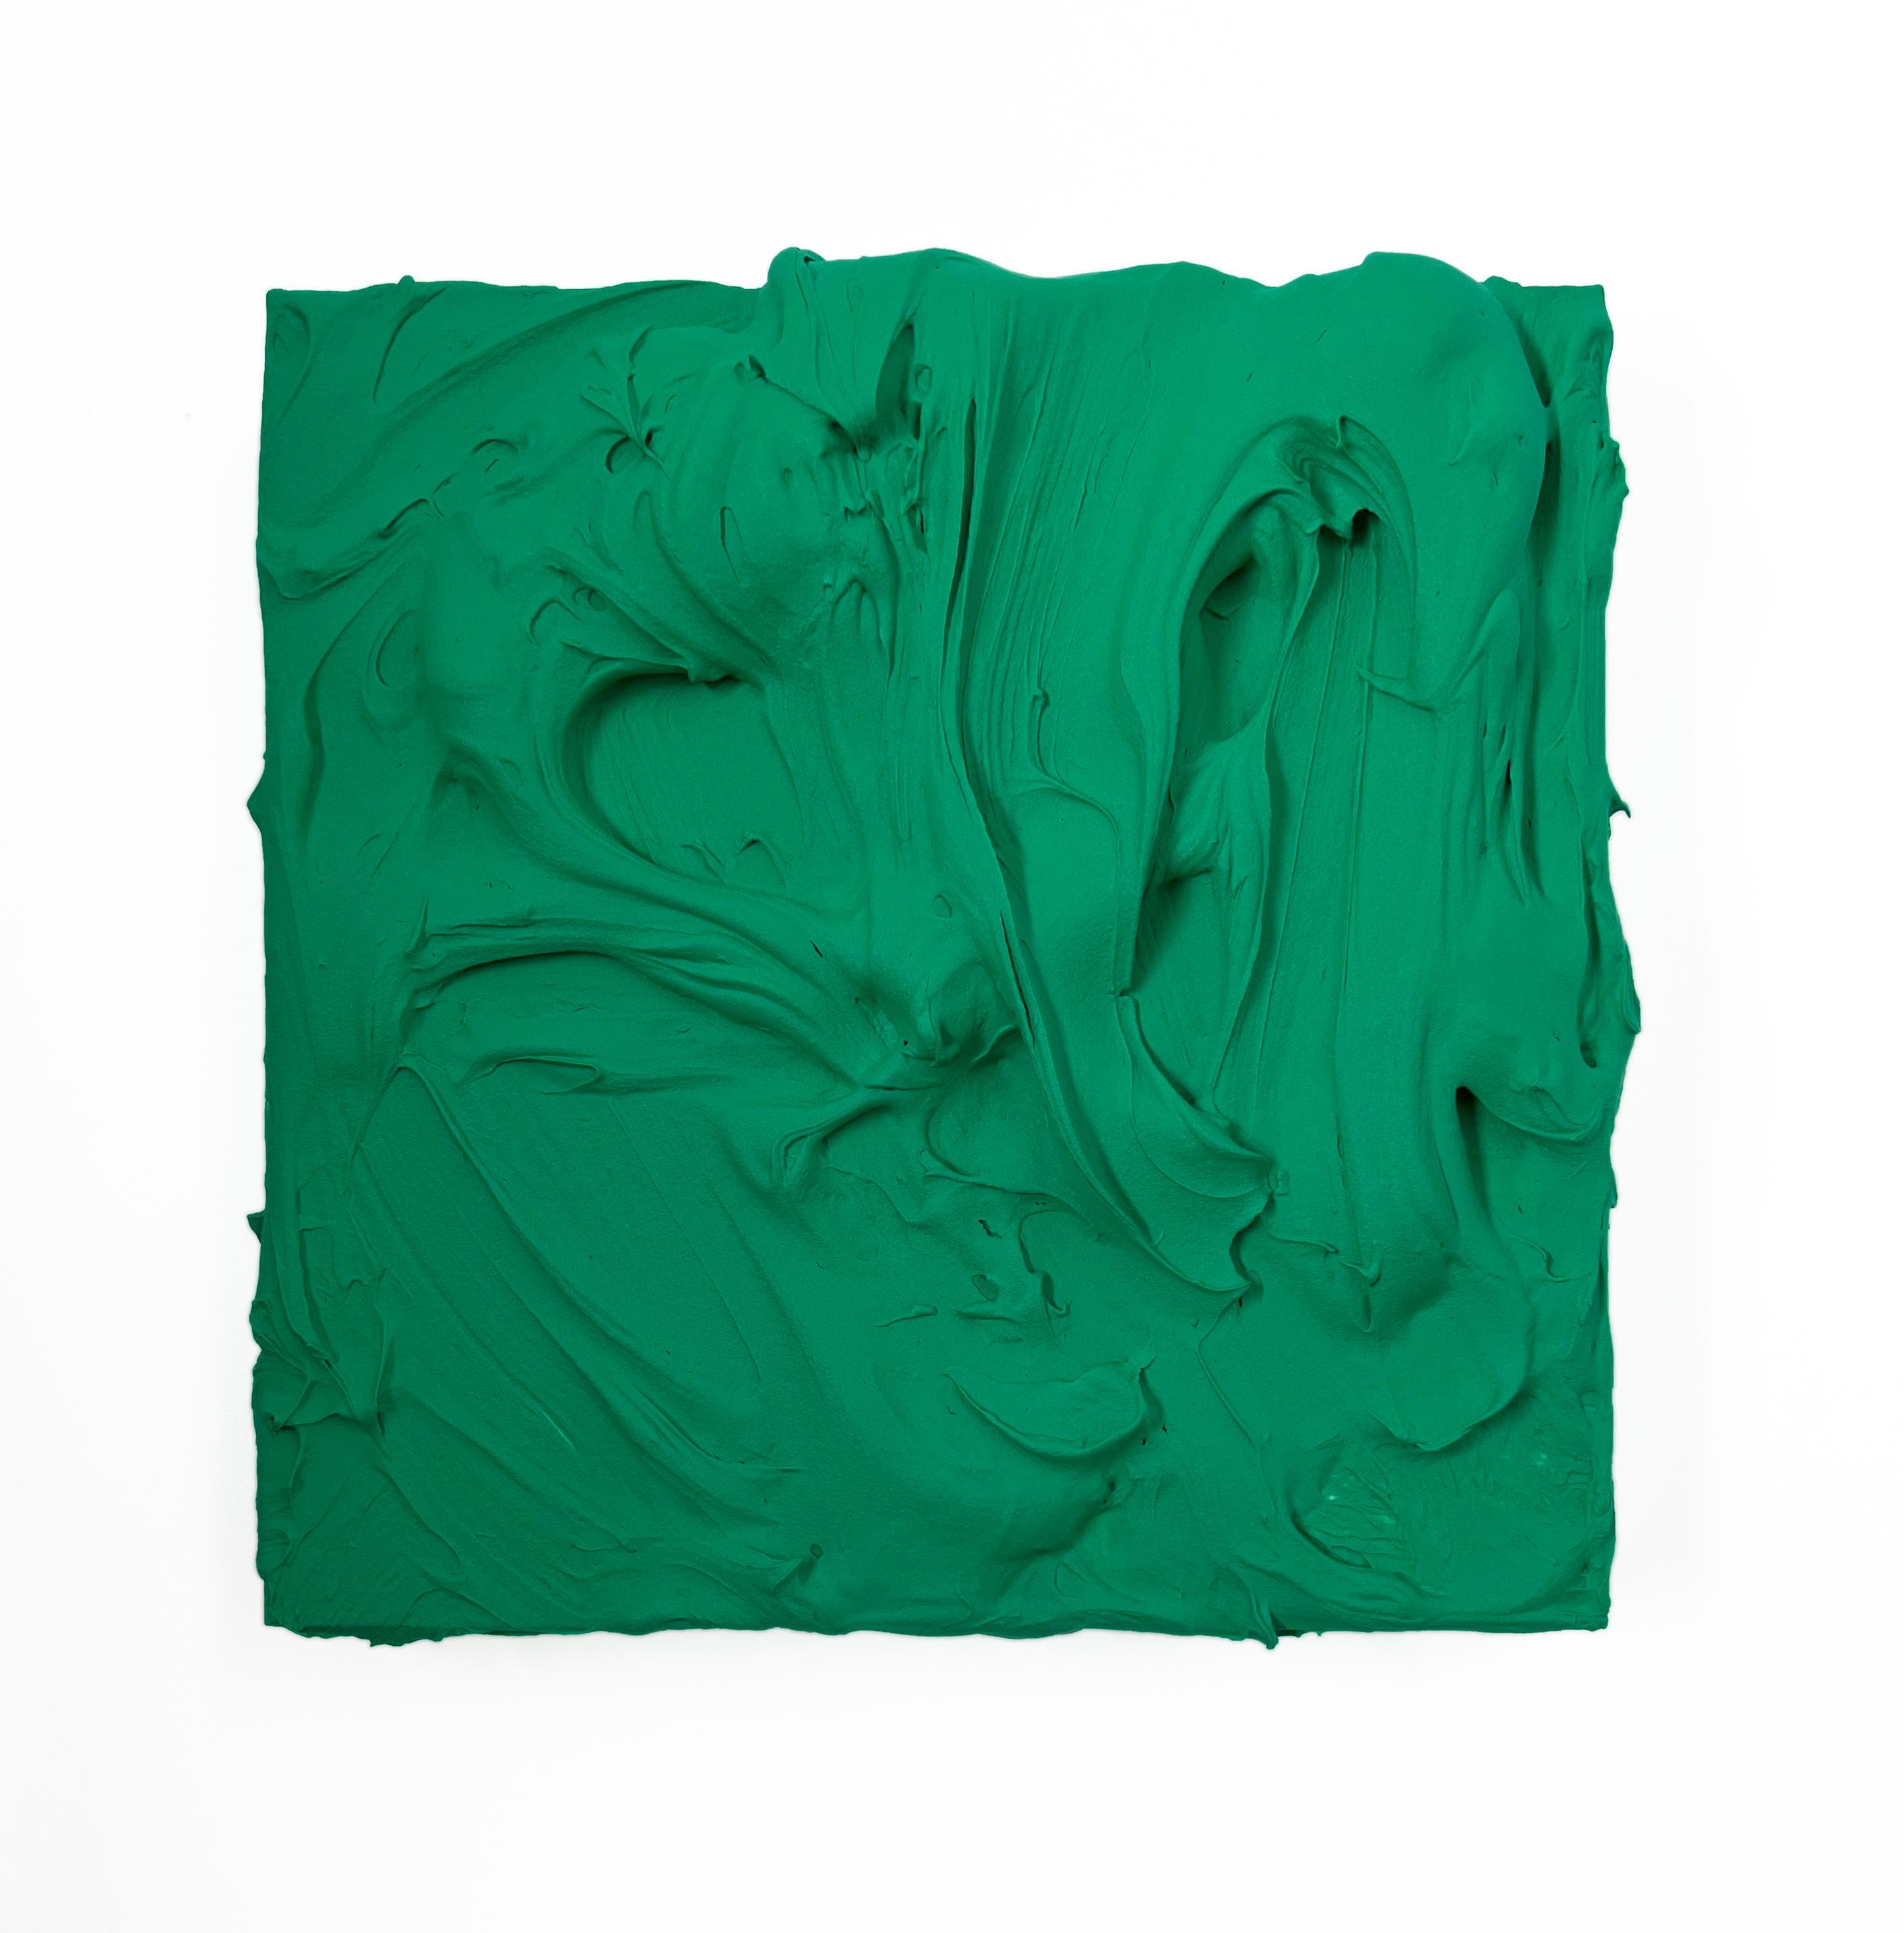 Chloe Hedden Abstract Painting - Emerald Green Excess (impasto thick painting monochrome pop art square design)